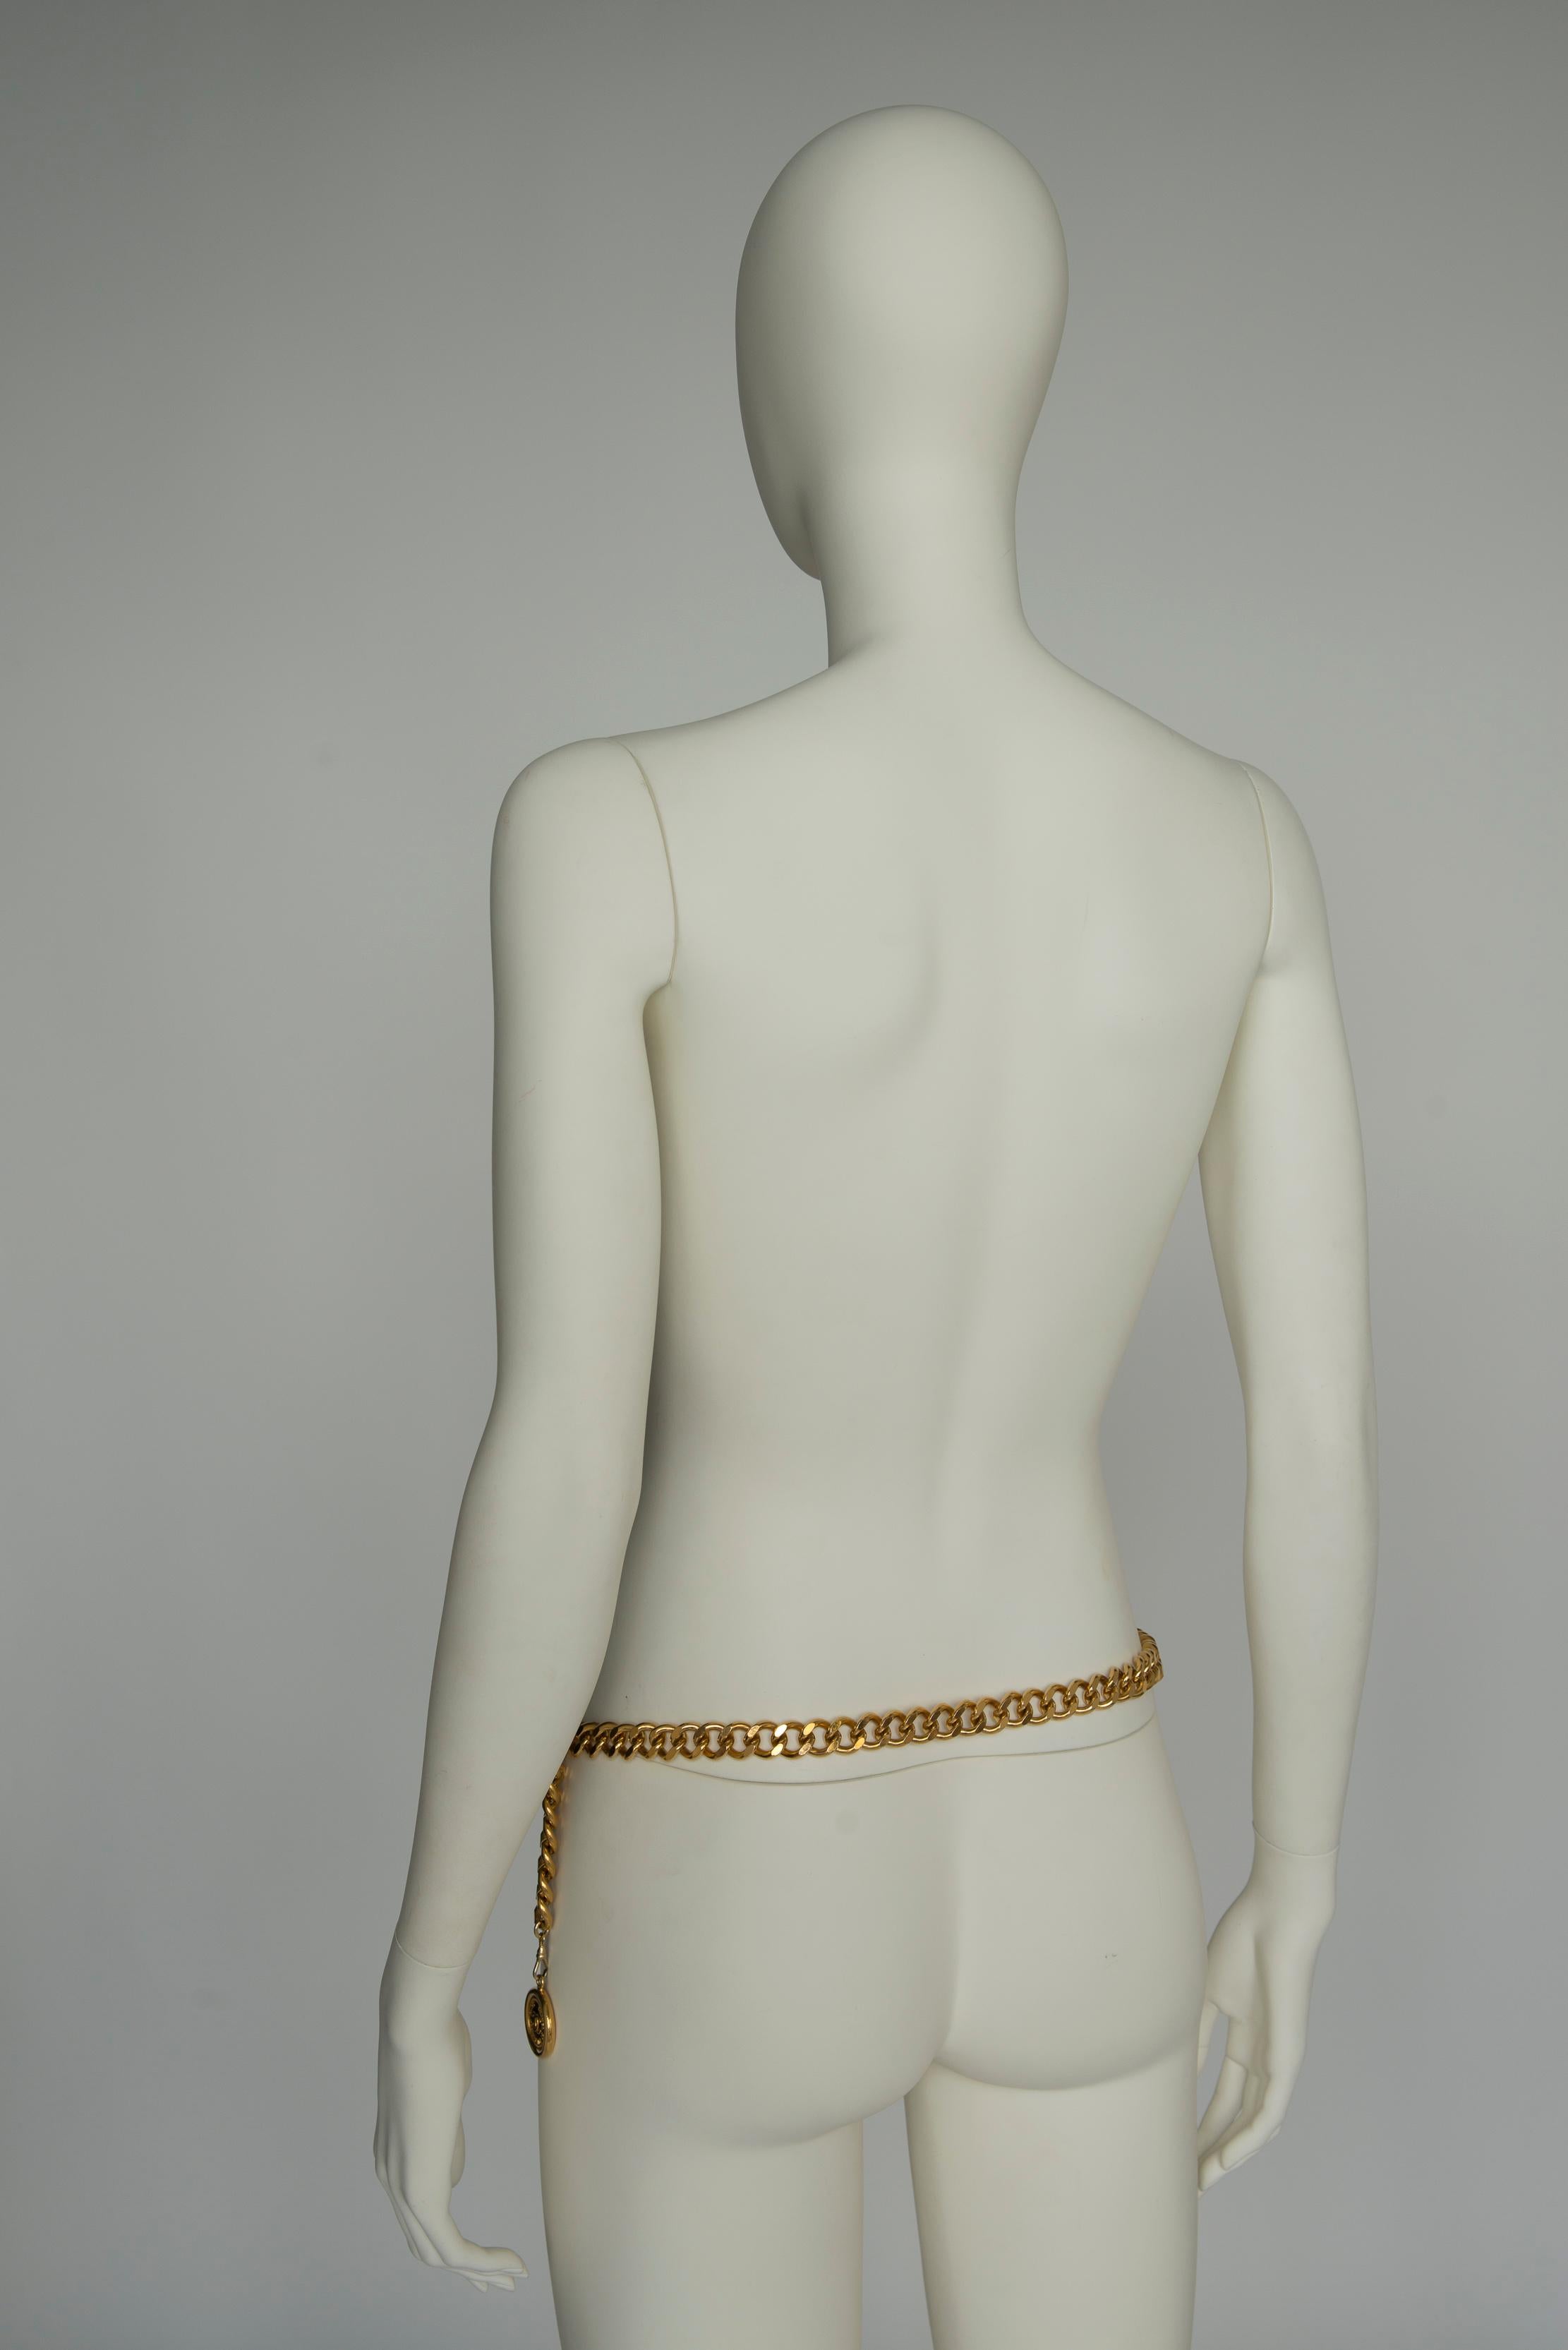 Chanel By Karl Lagerfeld Logo Plate & Medallion Coin Gold-Tone Chainlink Belt For Sale 2